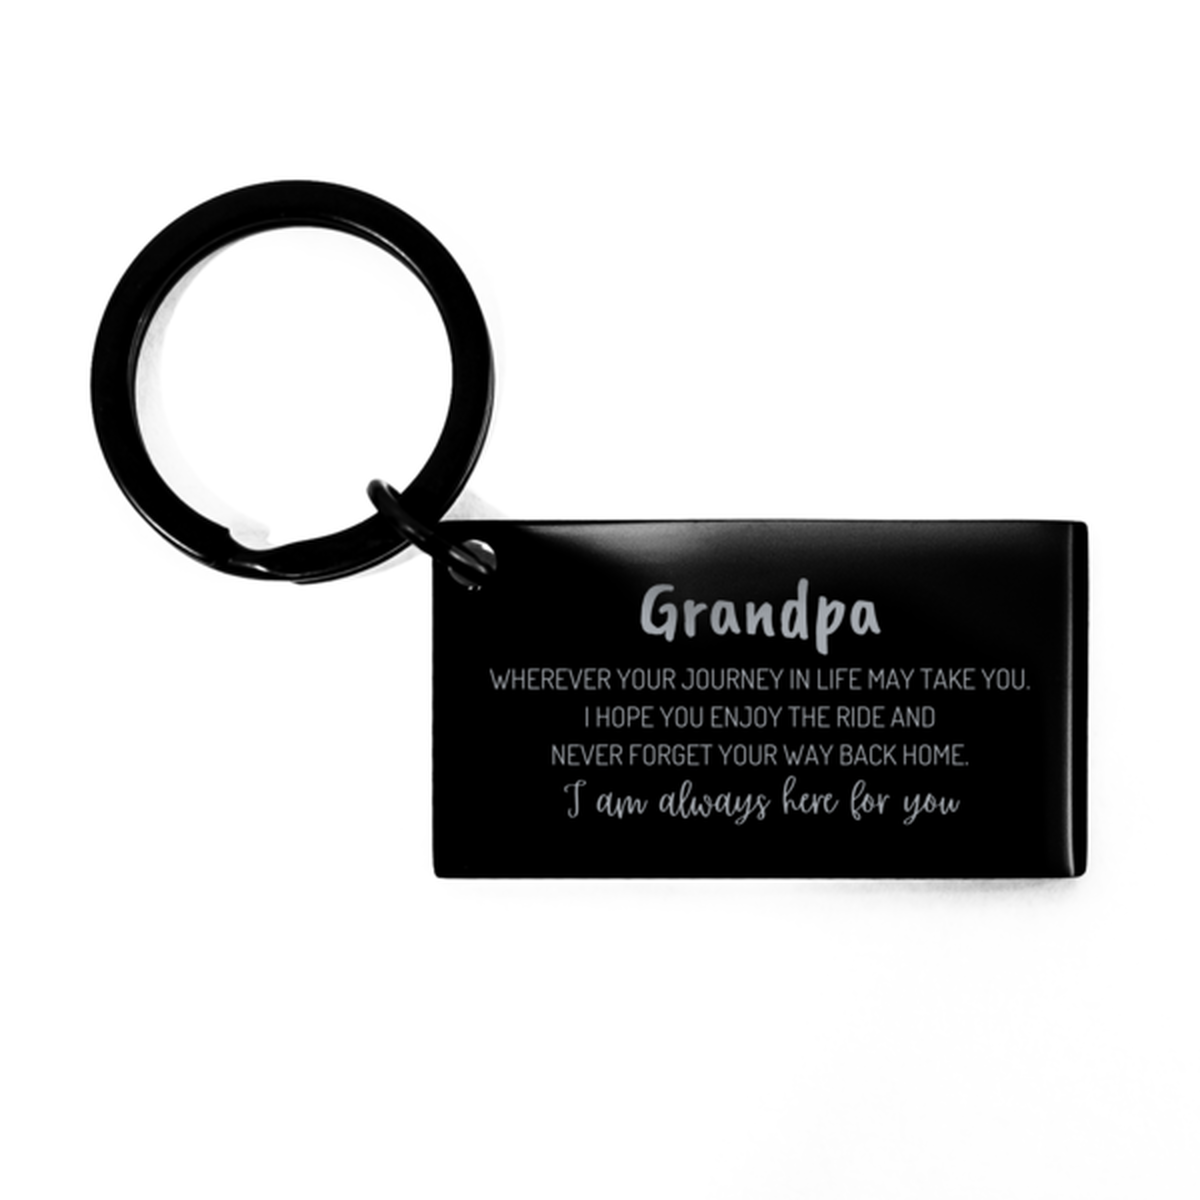 Grandpa wherever your journey in life may take you, I am always here for you Grandpa Keychain, Awesome Christmas Gifts For Grandpa, Grandpa Birthday Gifts for Men Women Family Loved One